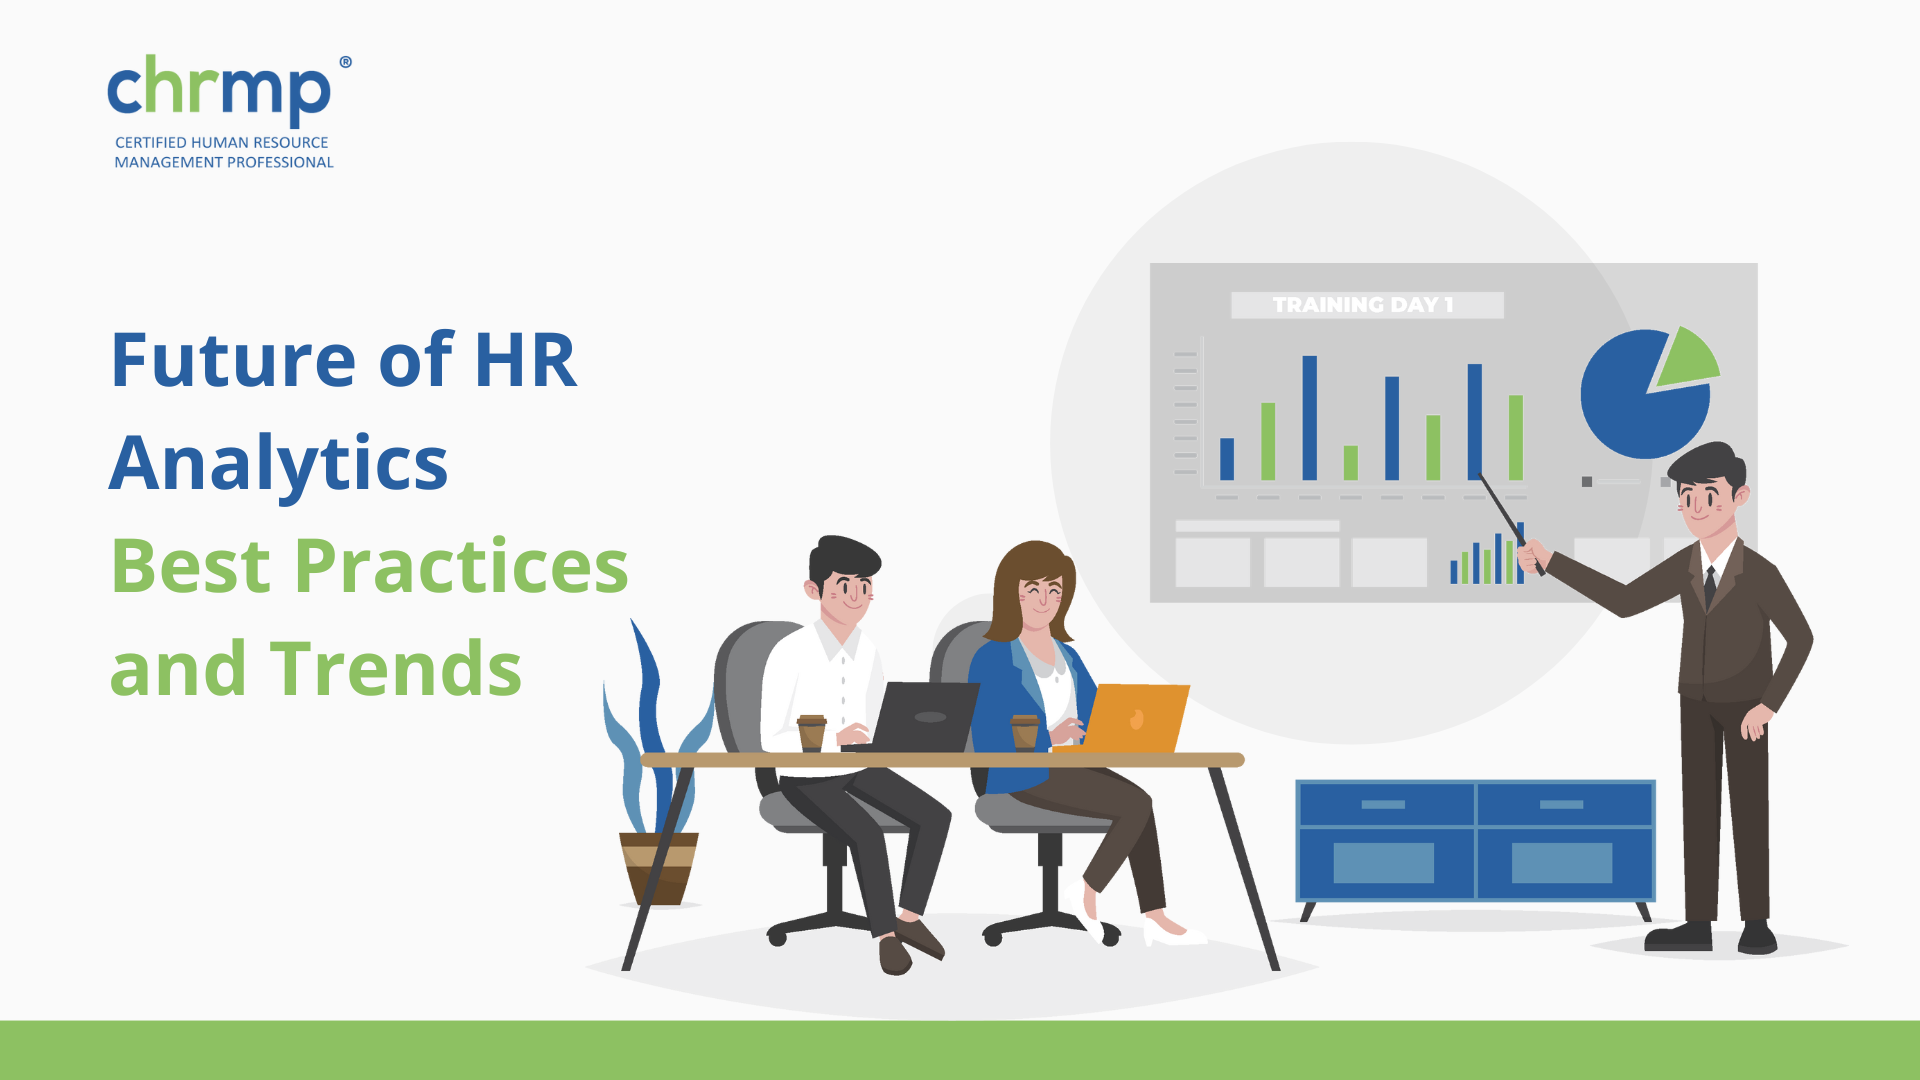 a literature review on hr analytics trends and future challenges